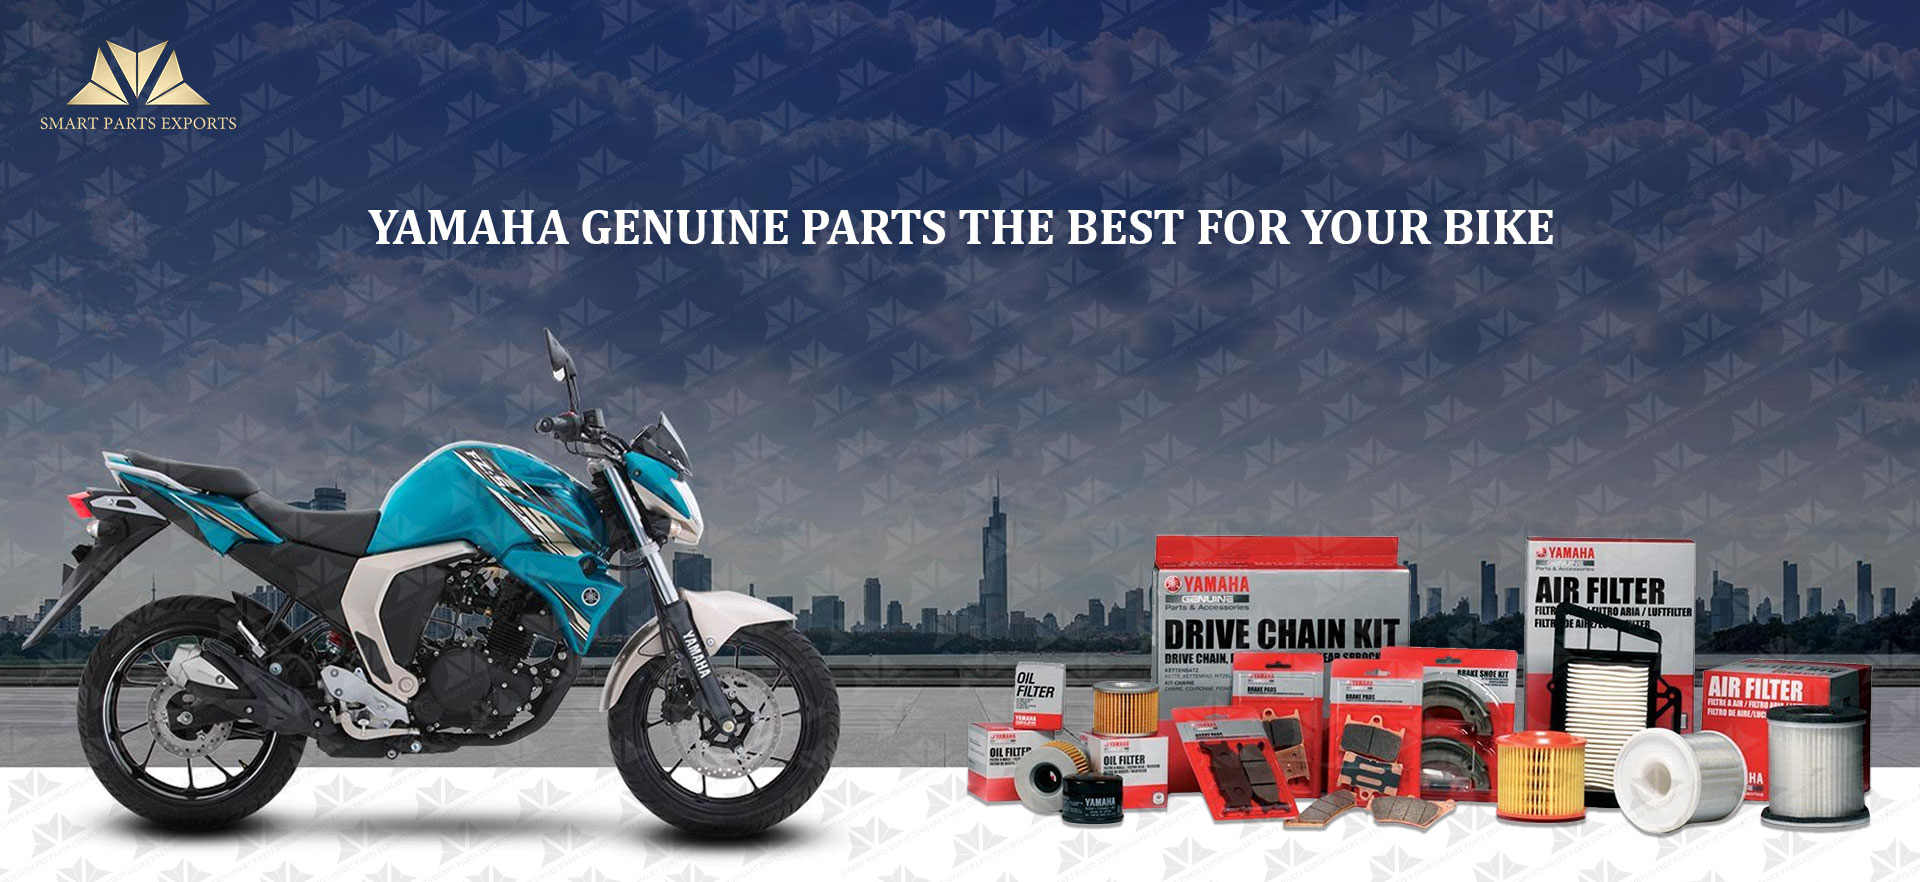 Yamaha Genuine Parts - The Best for Your Bike